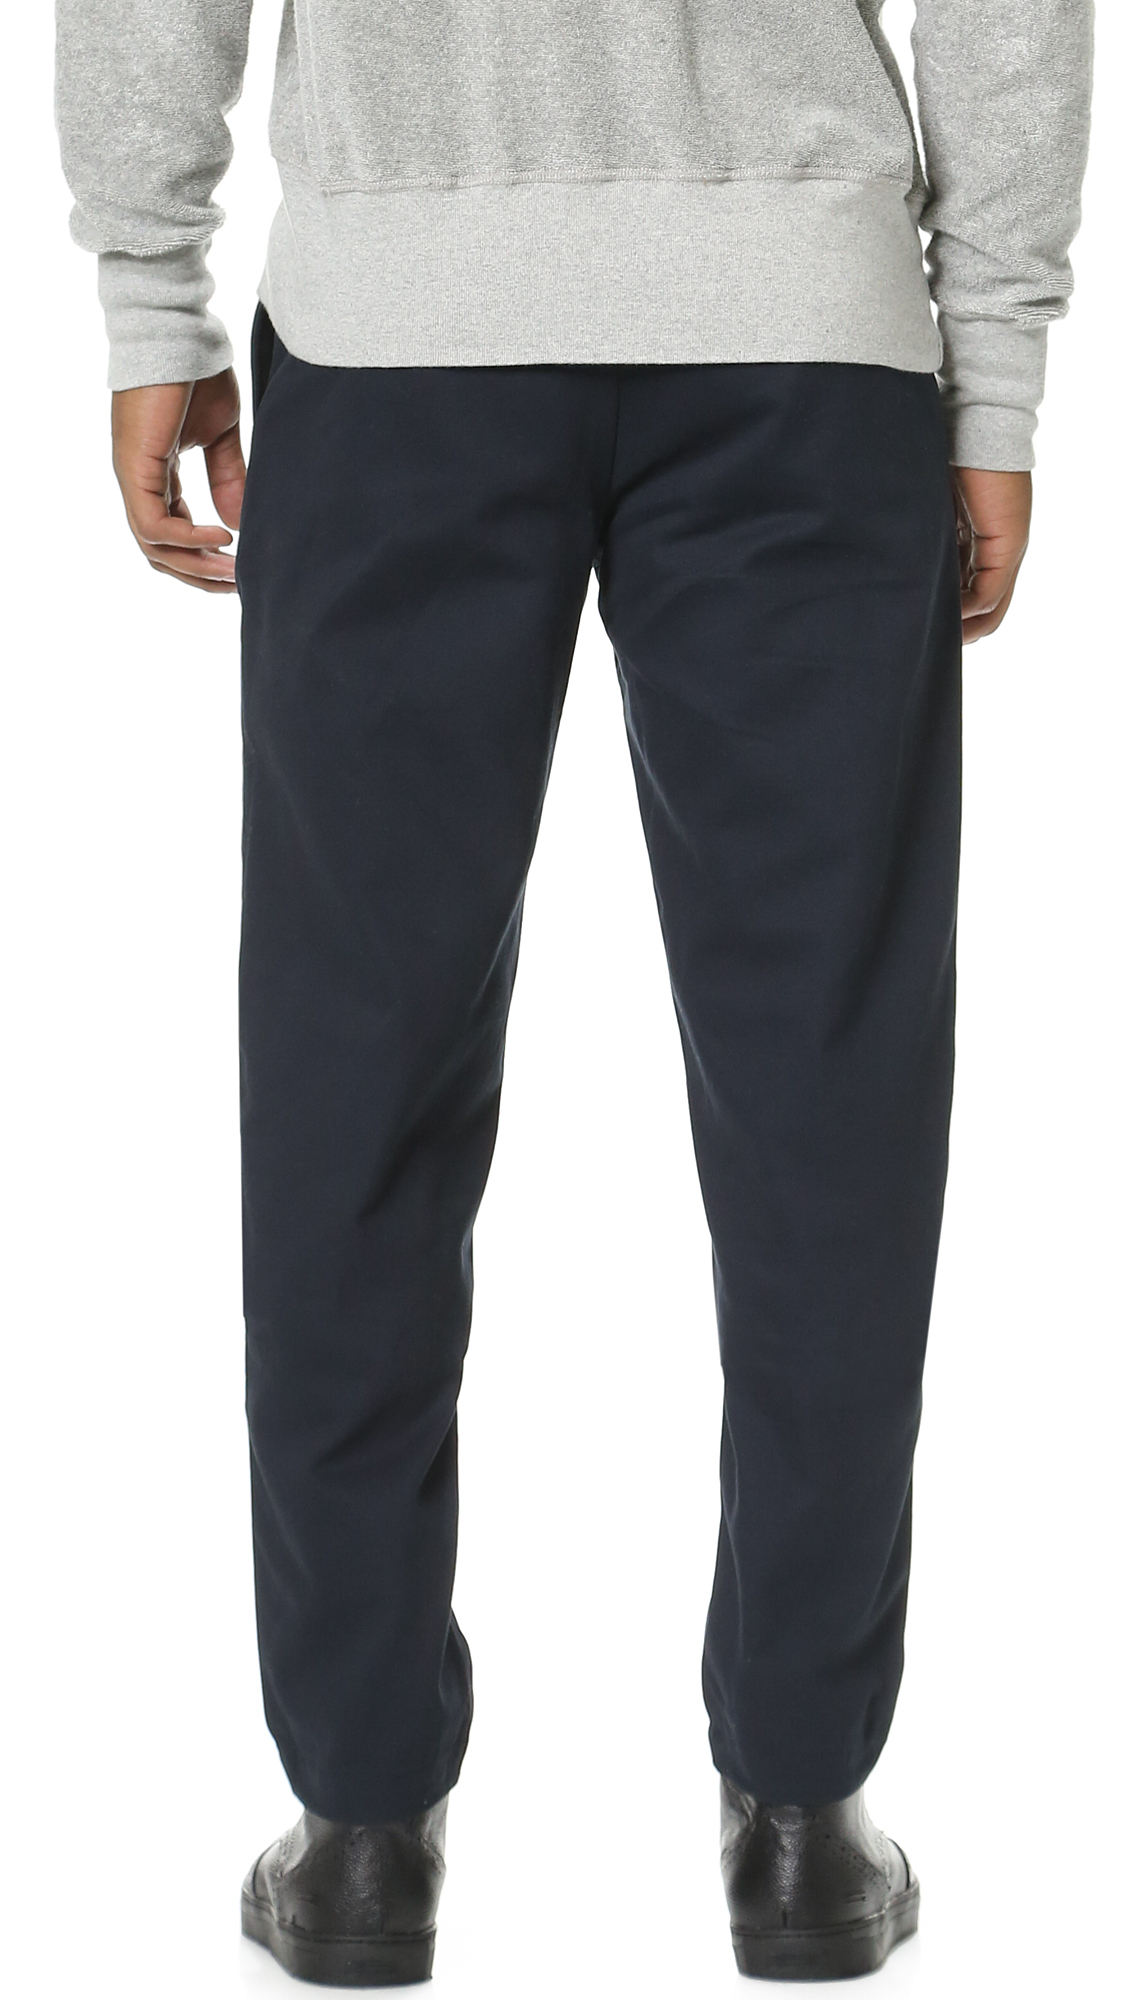 Lyst - Dickies Construct Straight & Narrow Pants in Blue for Men